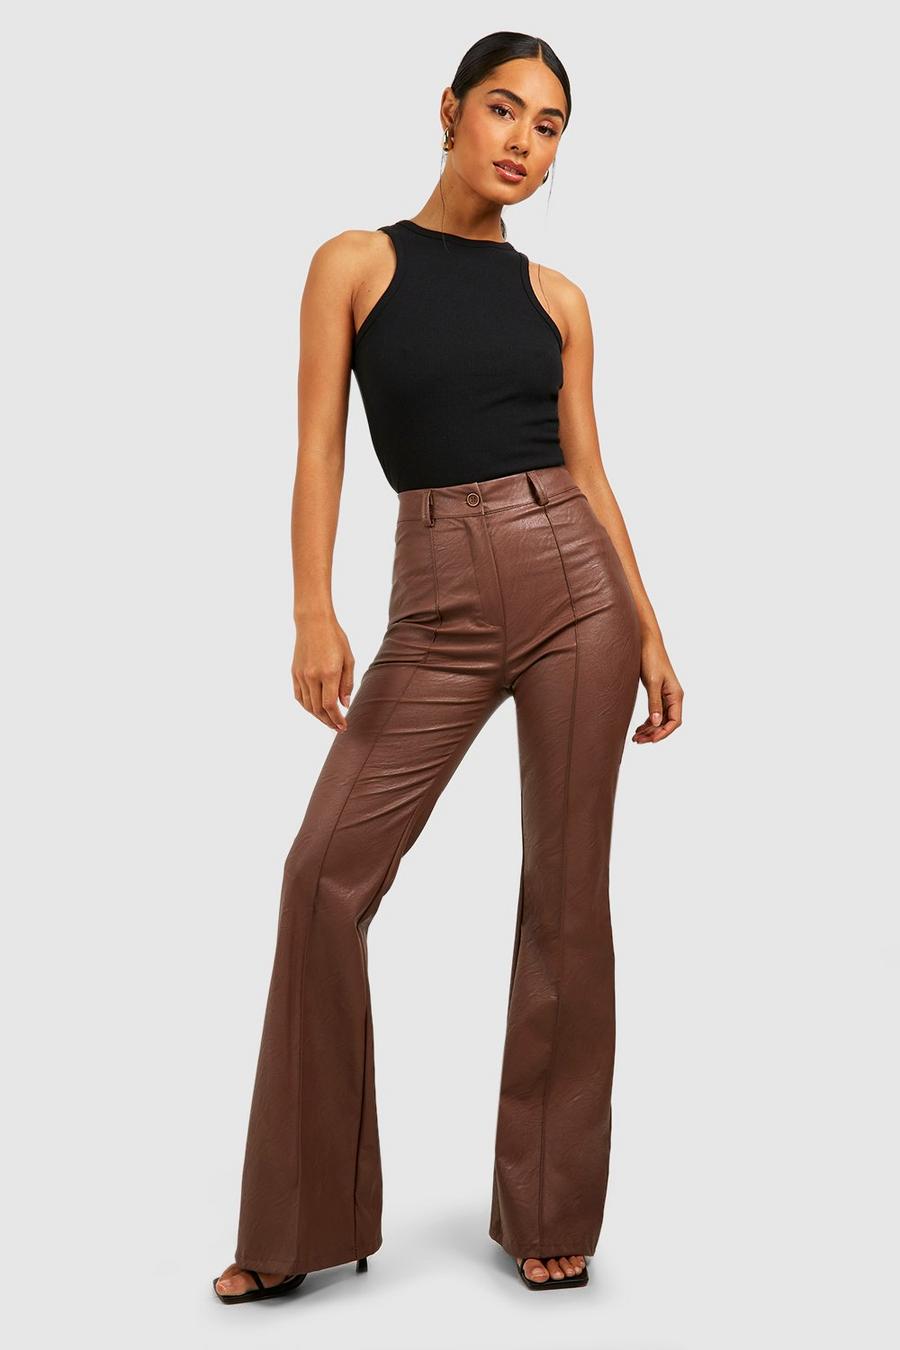 Chocolate Faux Leather High Waisted Seam Front Flared Pants